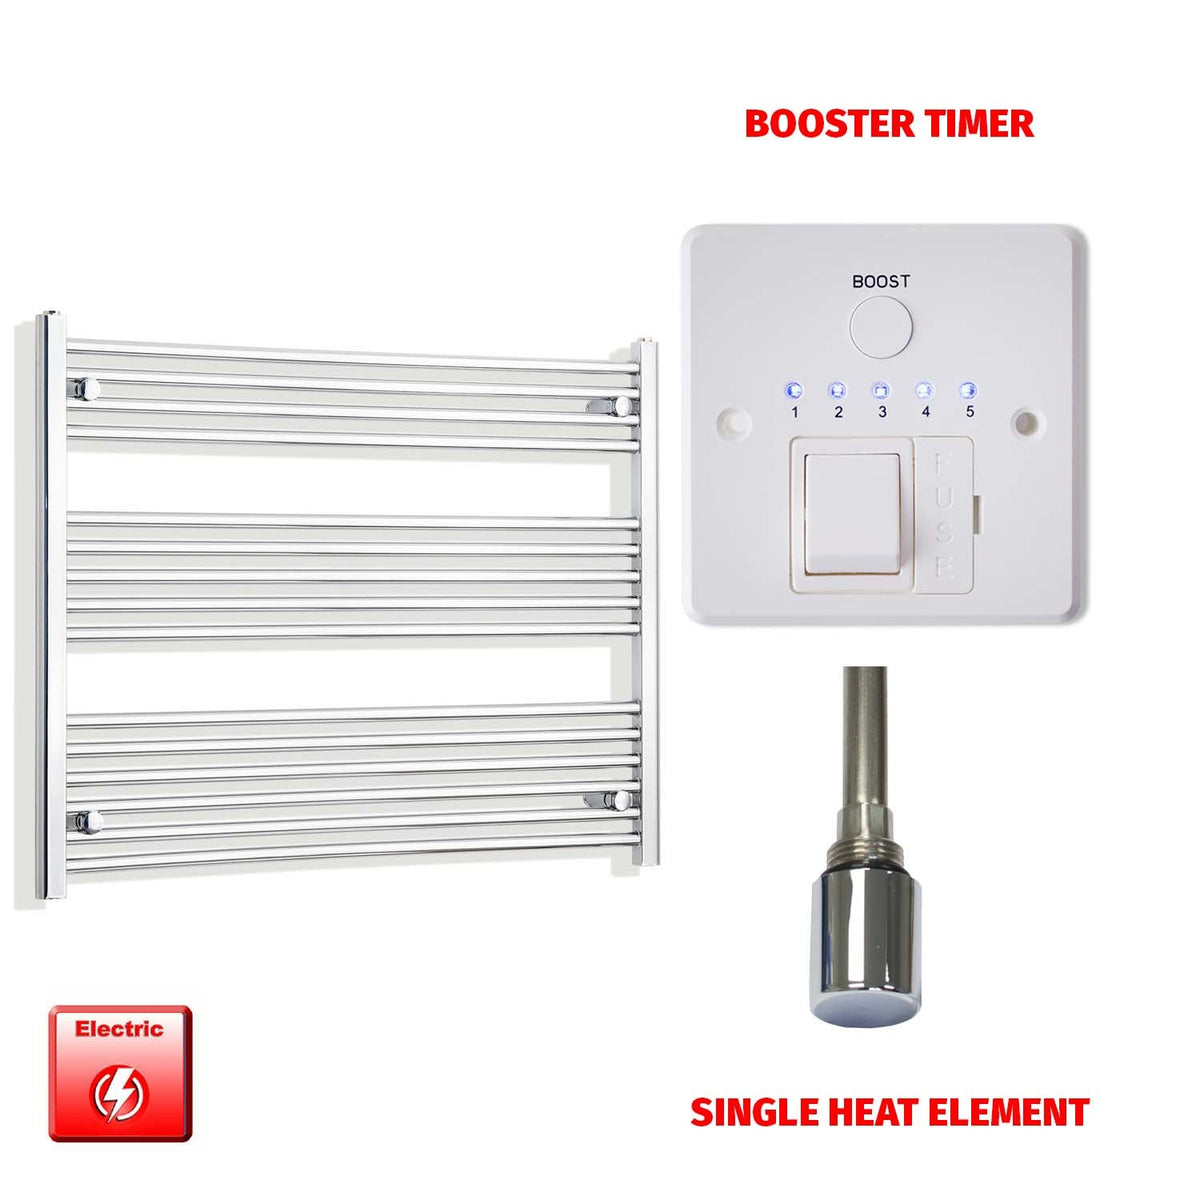 800mm High 950mm Wide Pre-Filled Electric Heated Towel Rail Radiator Straight Chrome Single heat element Booster timer